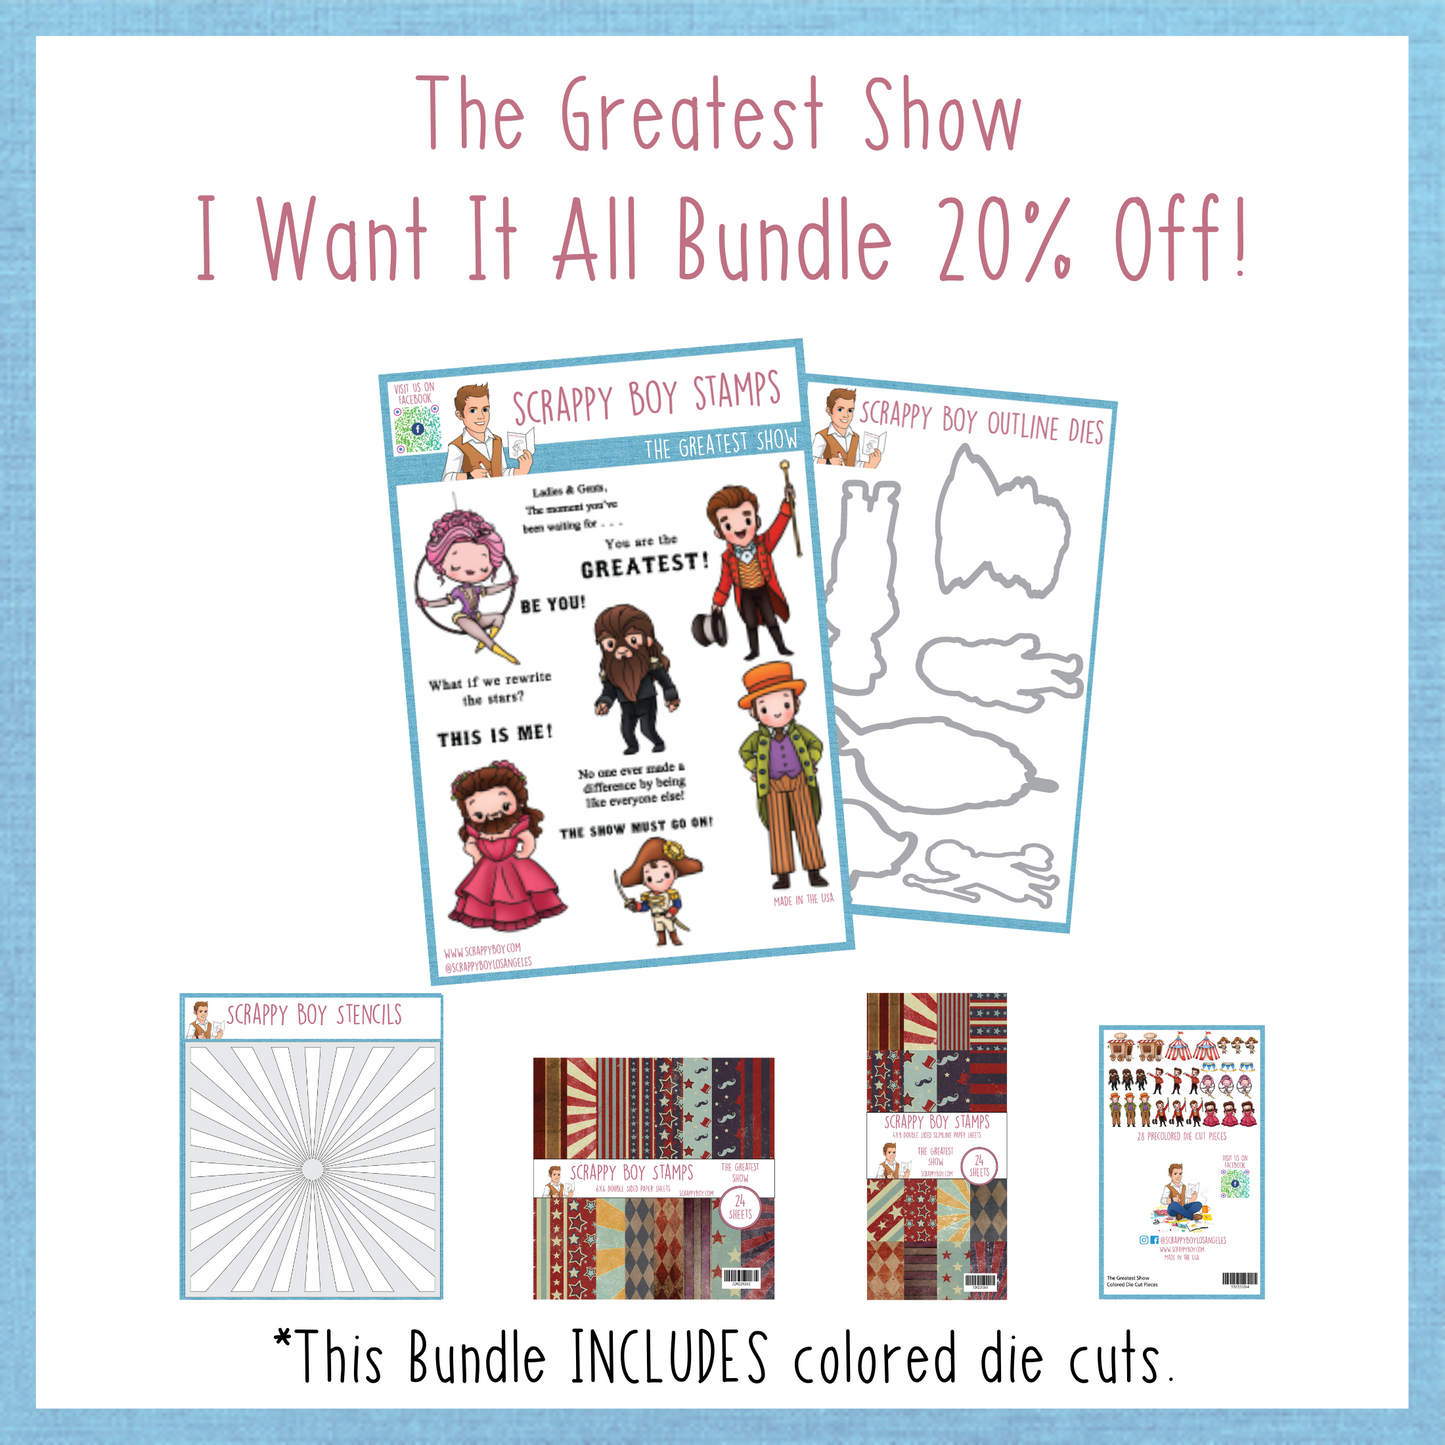 I Want It All Bundle - The Greatest Show Release scrappyboystamps